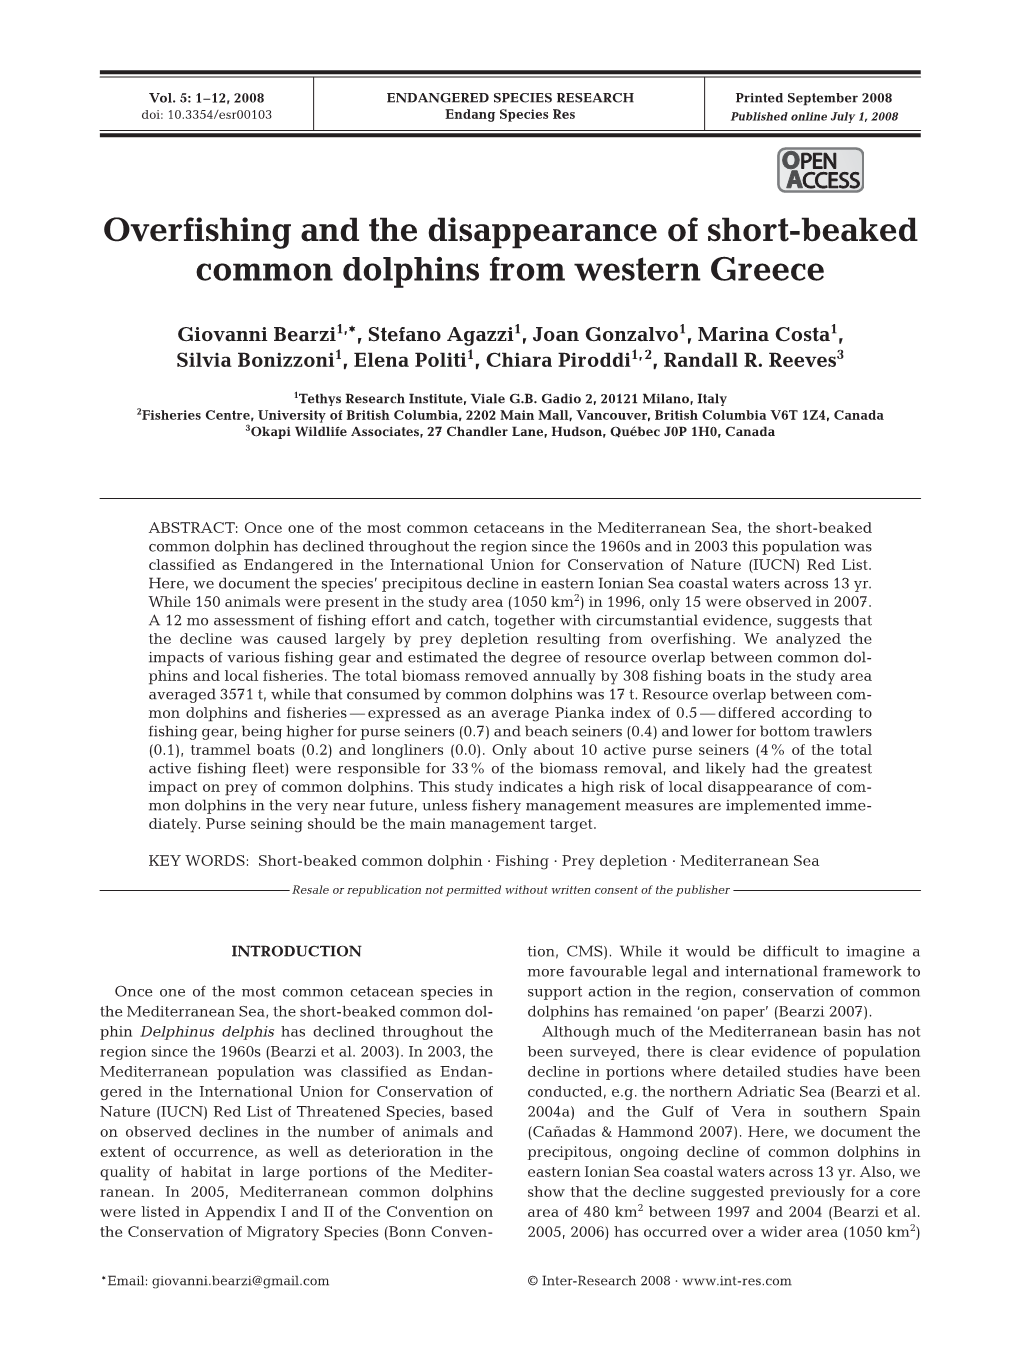 Overfishing and the Disappearance of Short-Beaked Common Dolphins from Western Greece